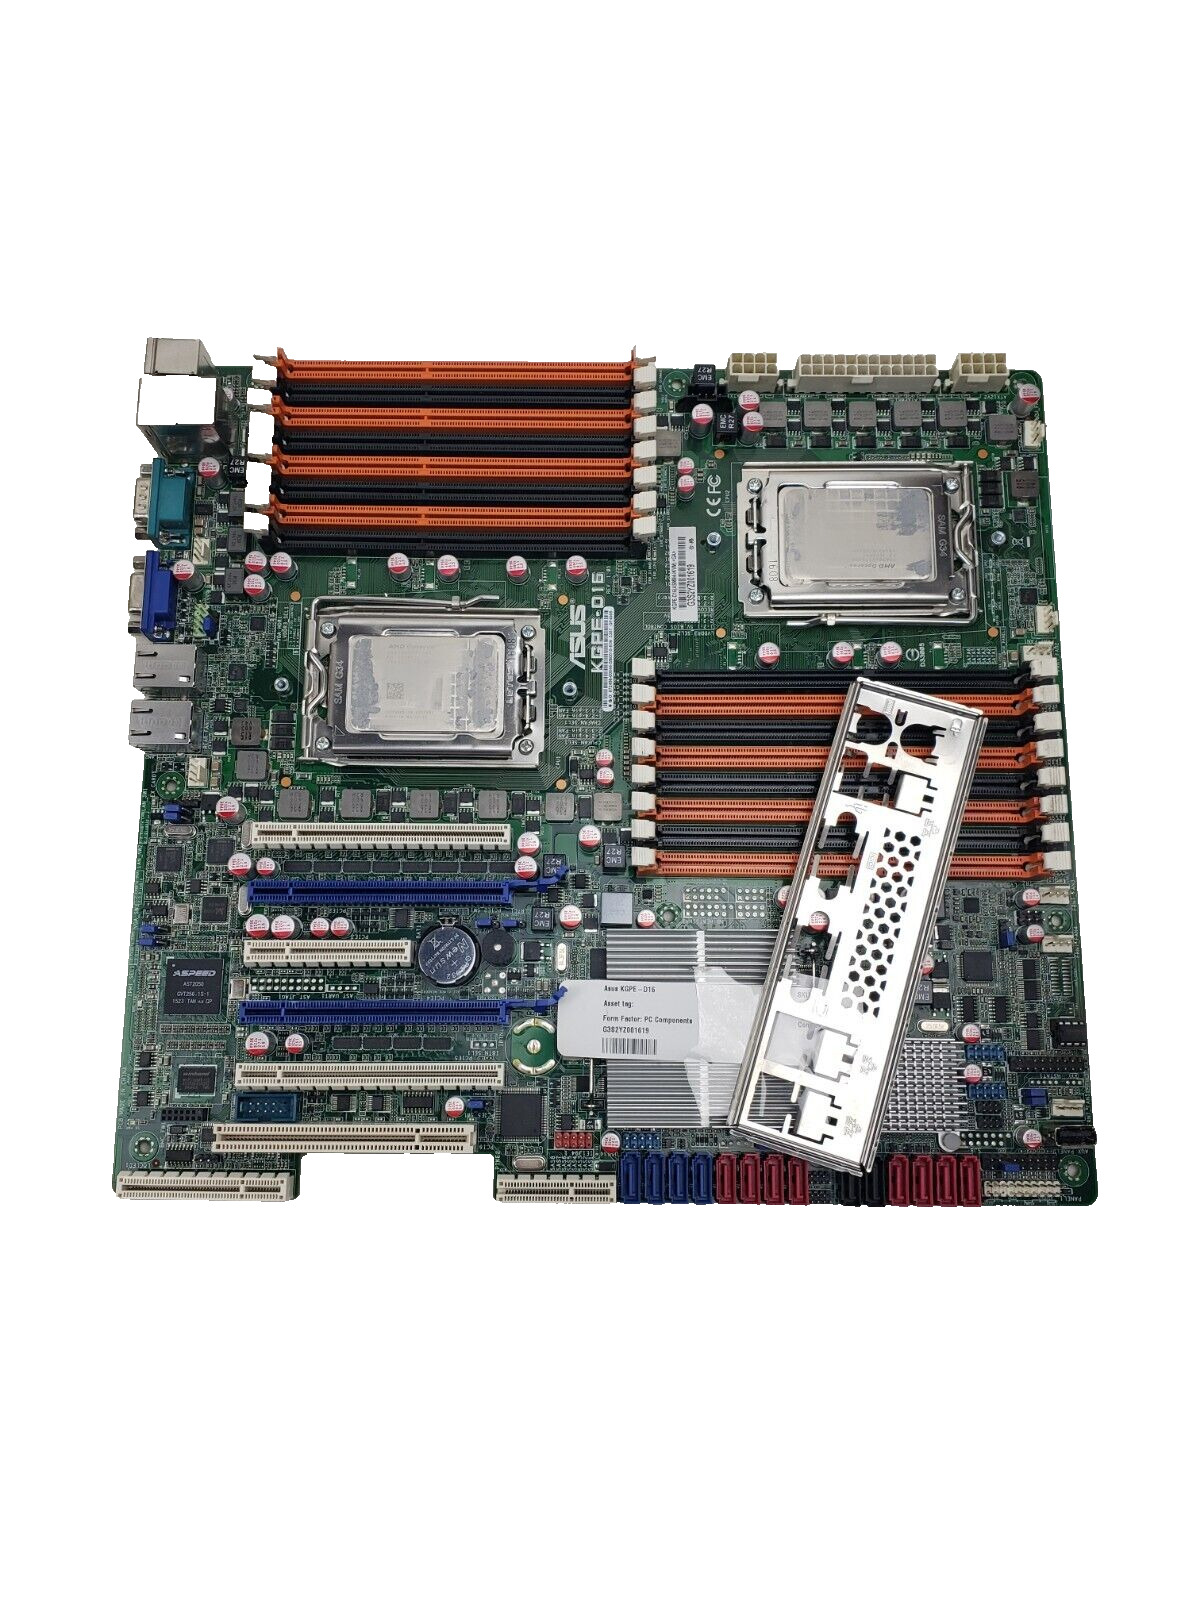 Asus KGPE-D16 Server Motherboard with 2x Opteron 6386 and IO Shield Tested Good